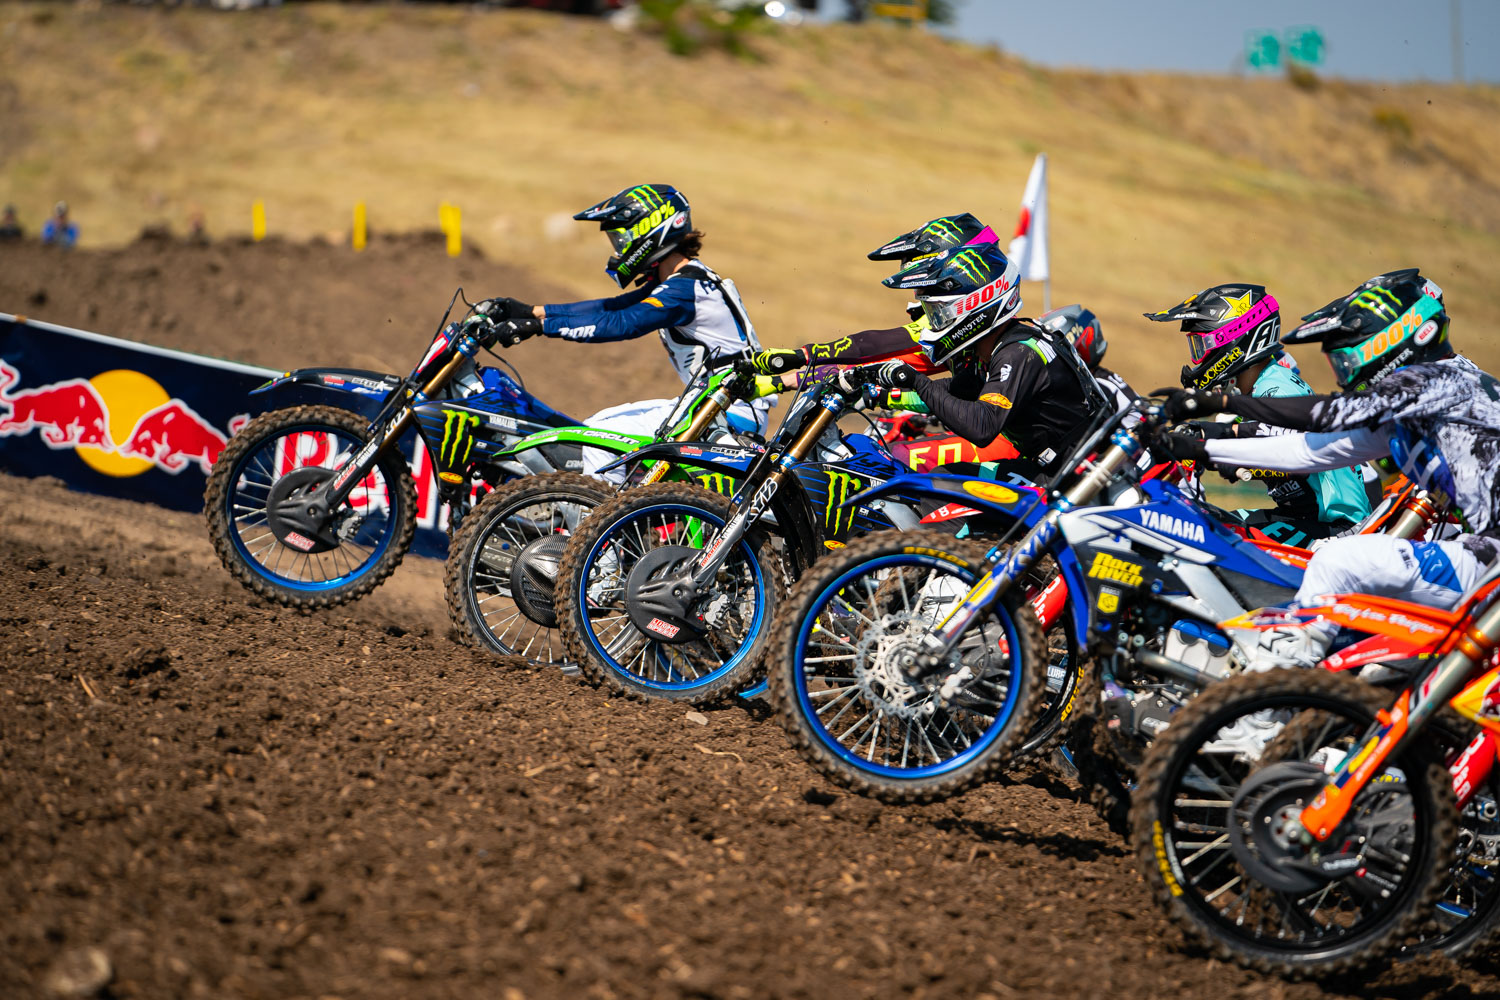 2020 Thunder Valley Motocross Race Report & Results Swapmoto Live